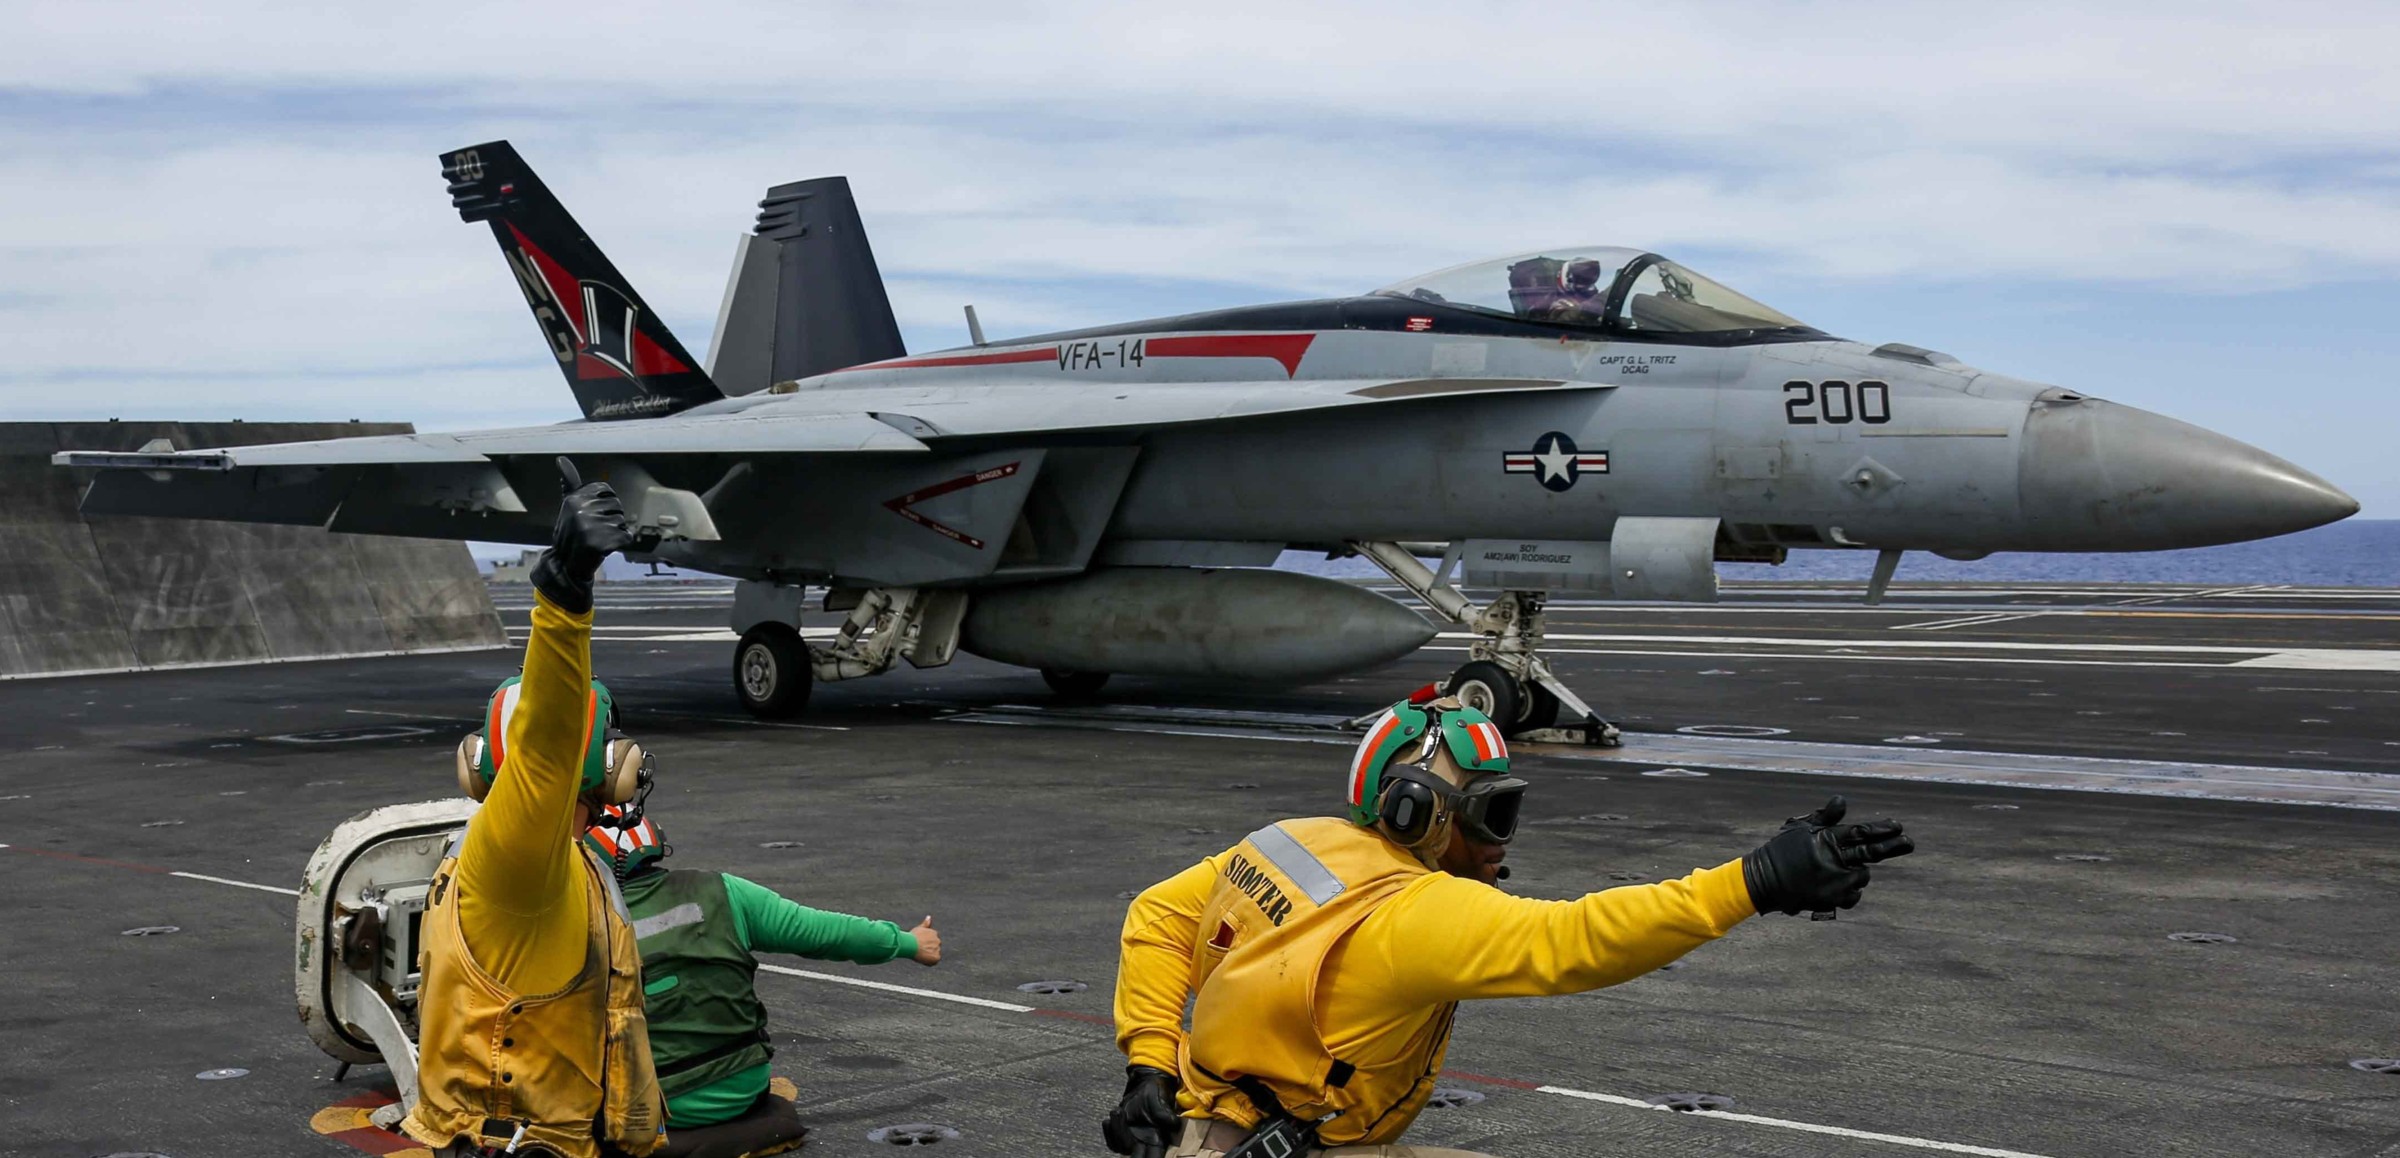 vfa-14 tophatters strike fighter squadron f/a-18e super hornet cvn-72 uss abraham lincoln cvw-9 us navy 80